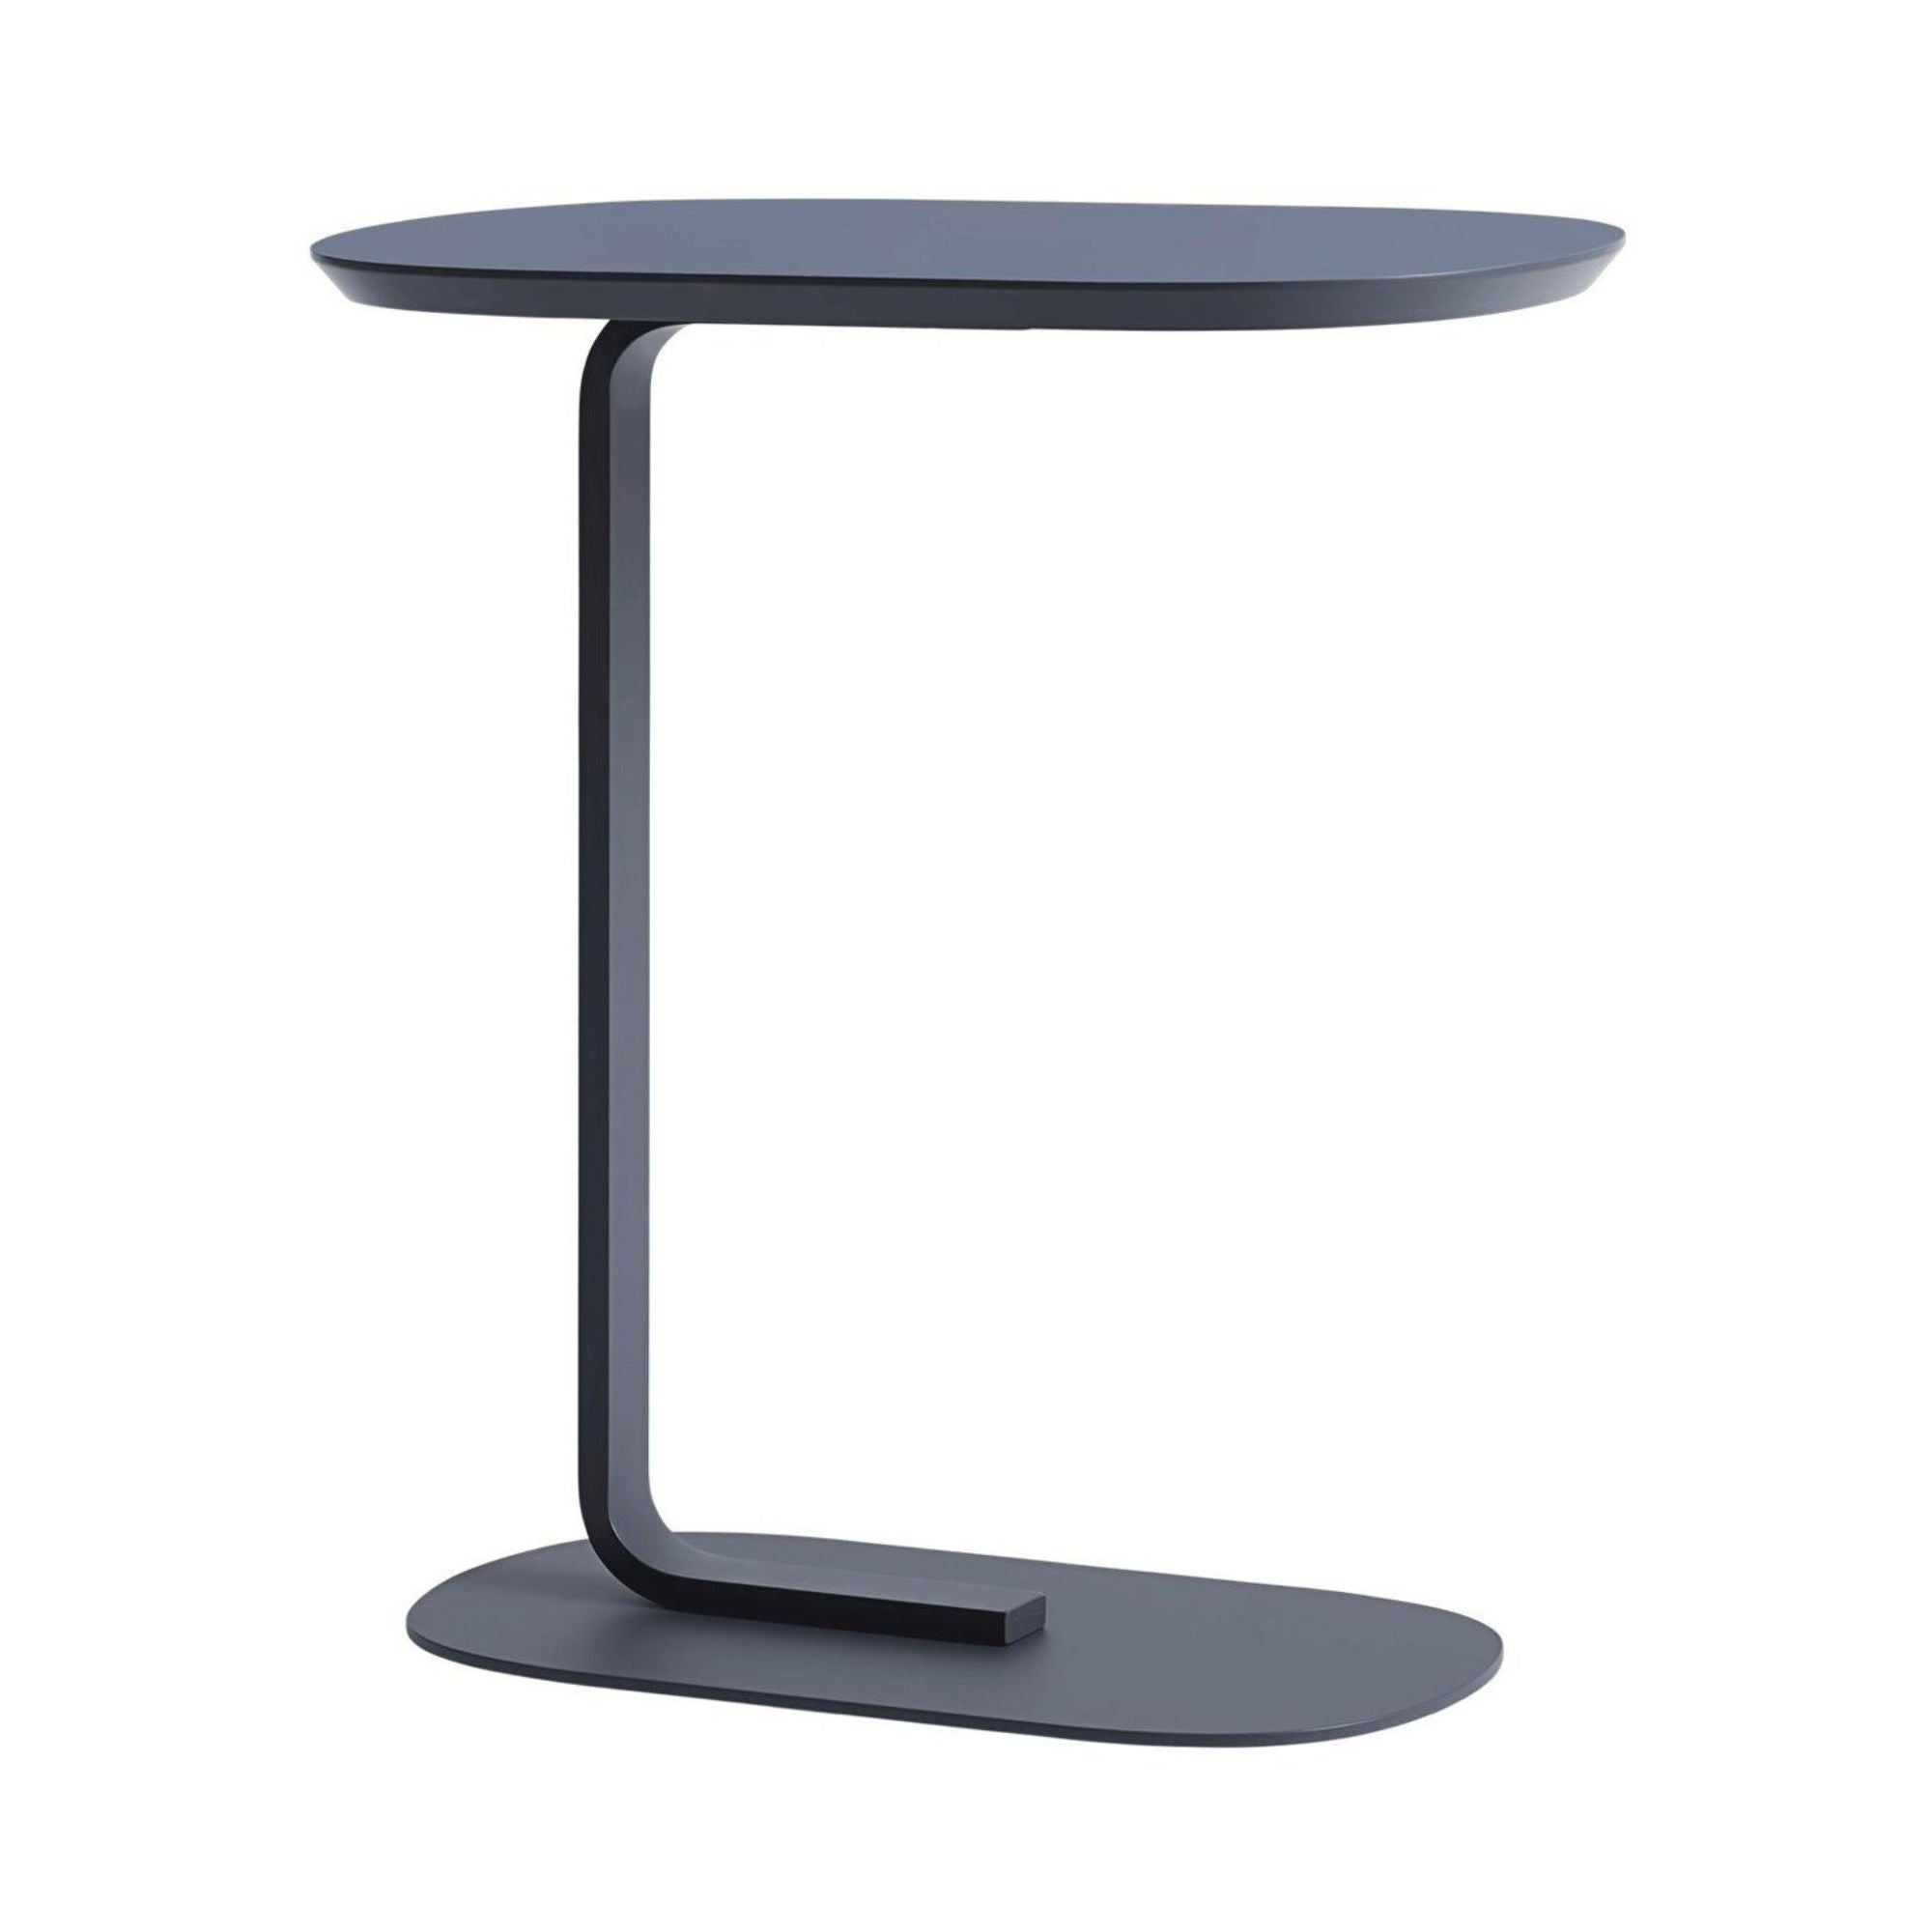 Muuto Relate Side Table (h60.5cm), blue grey